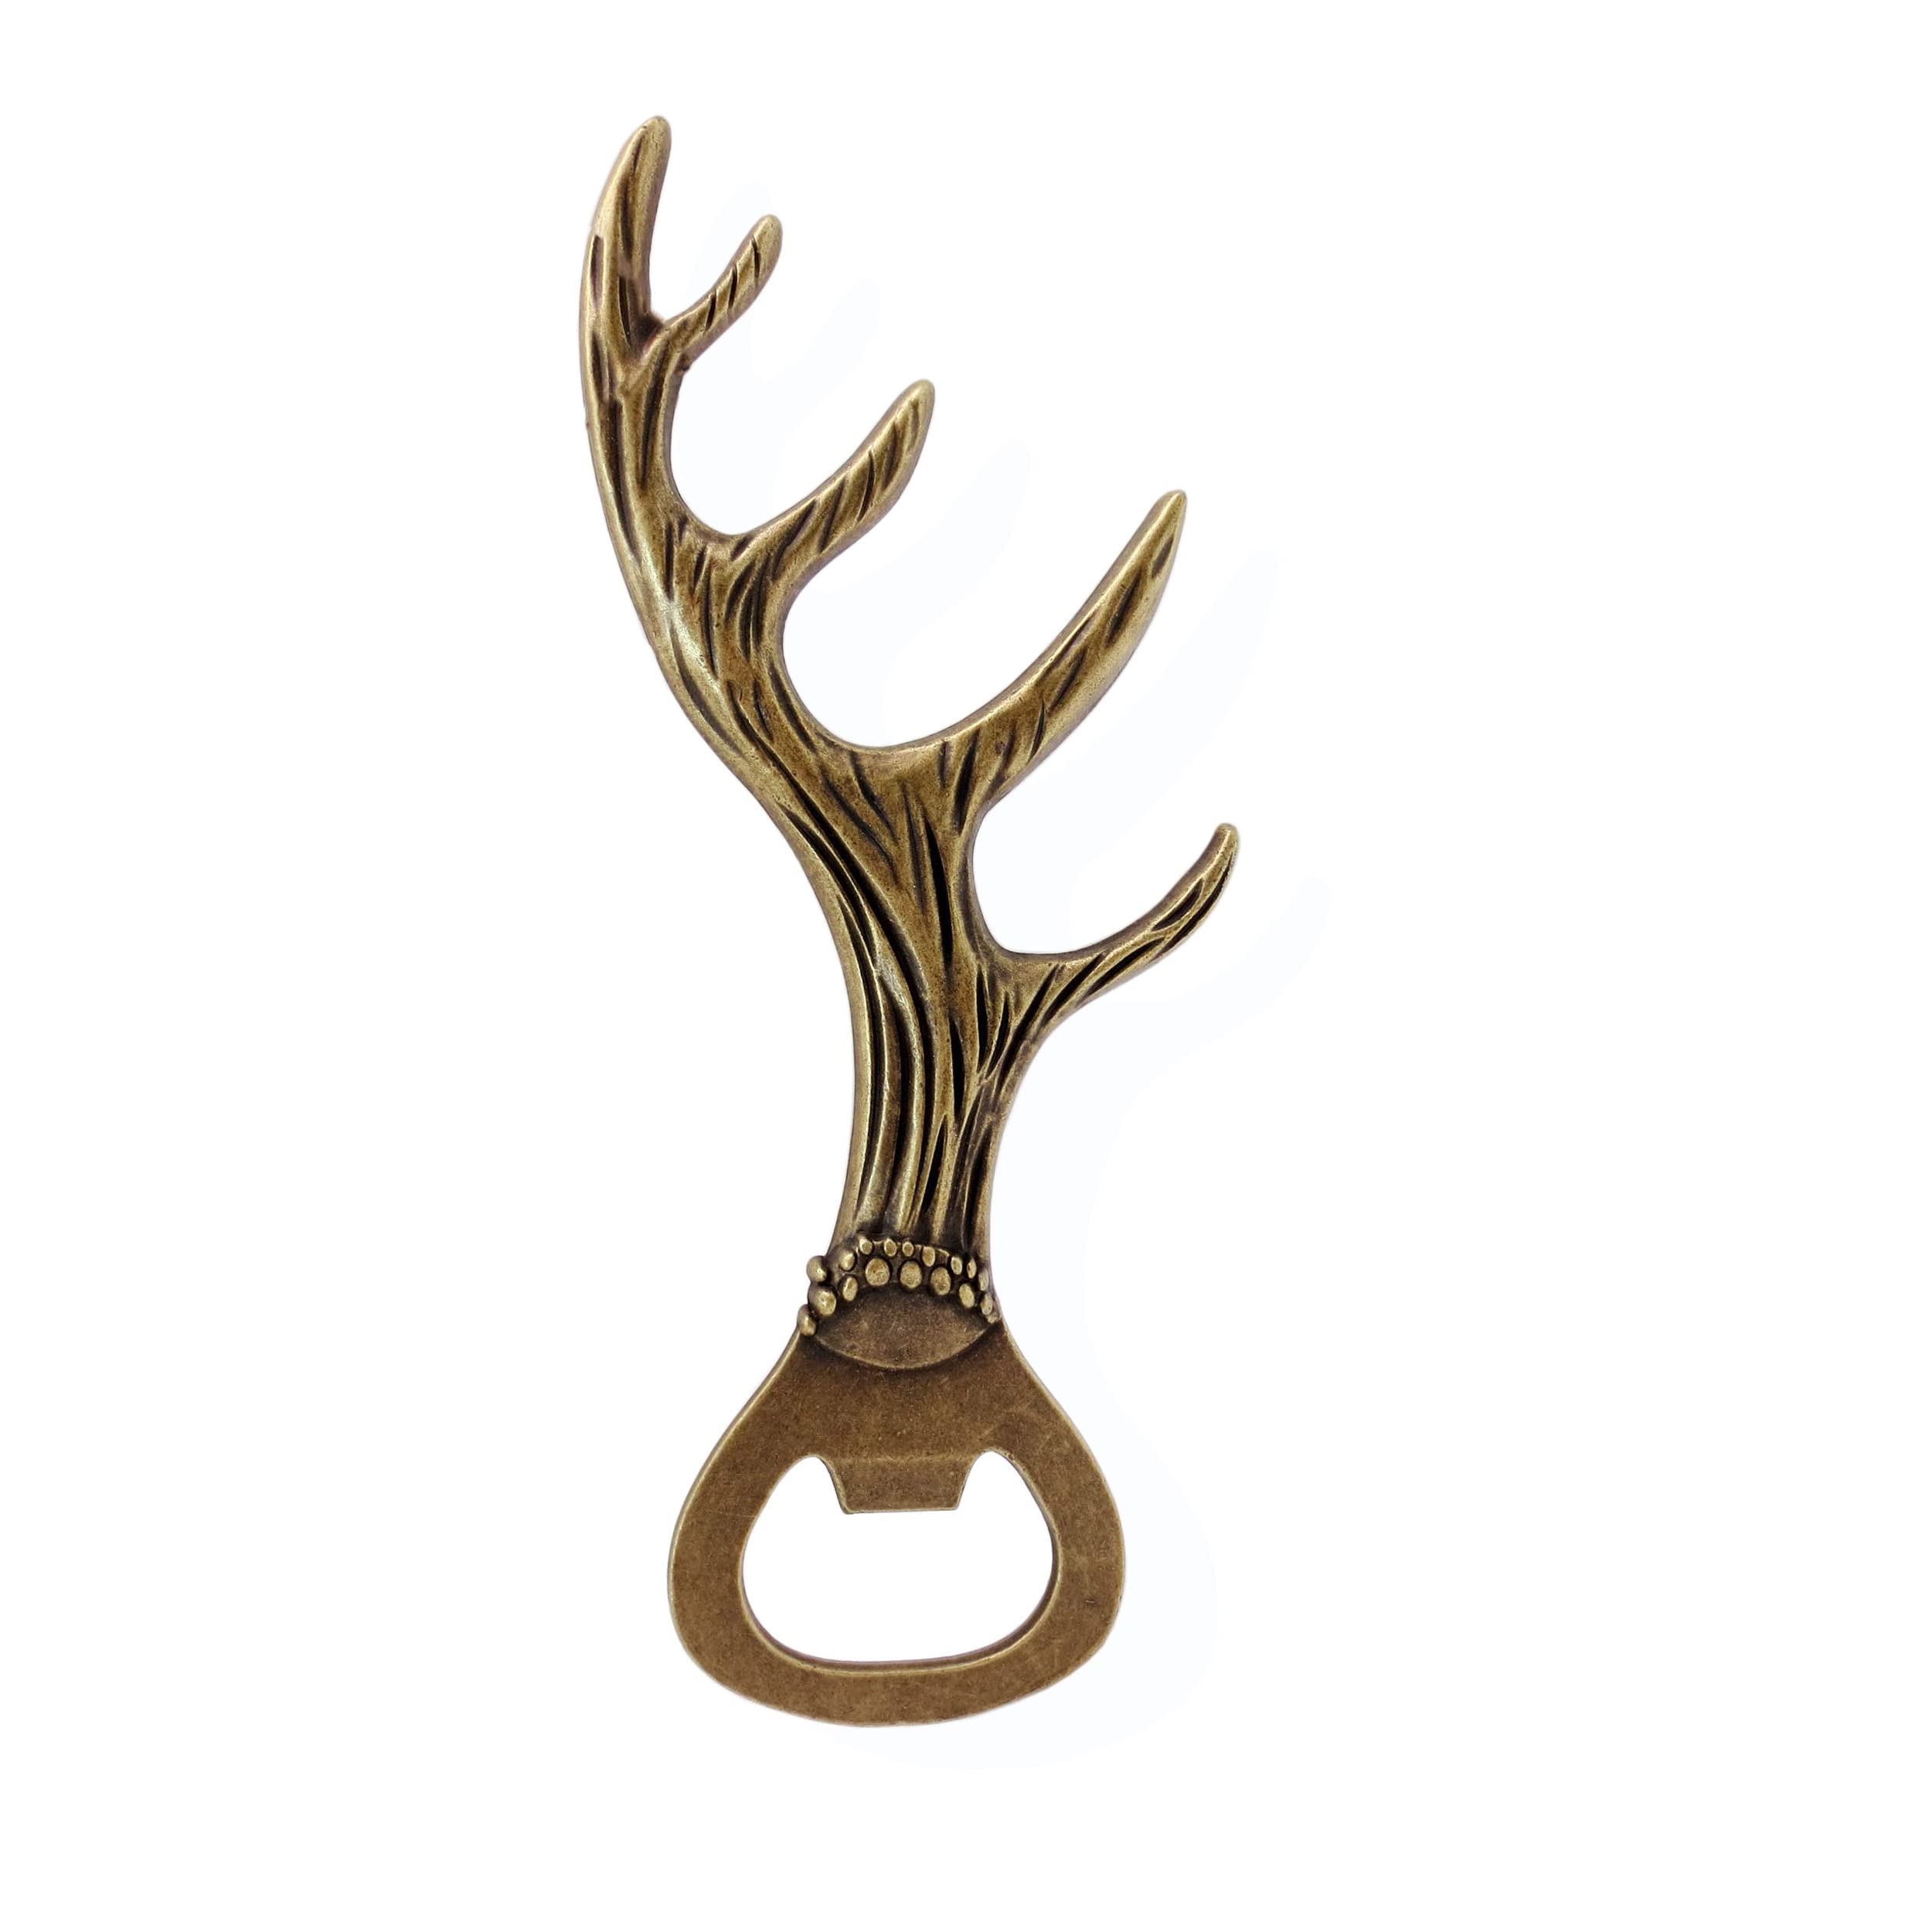 DIDI GOAL Deer Antler Cool Beer Bottle Opener, durable and portable, present for men, home, party, wedding, Christmas occasion gift (1)